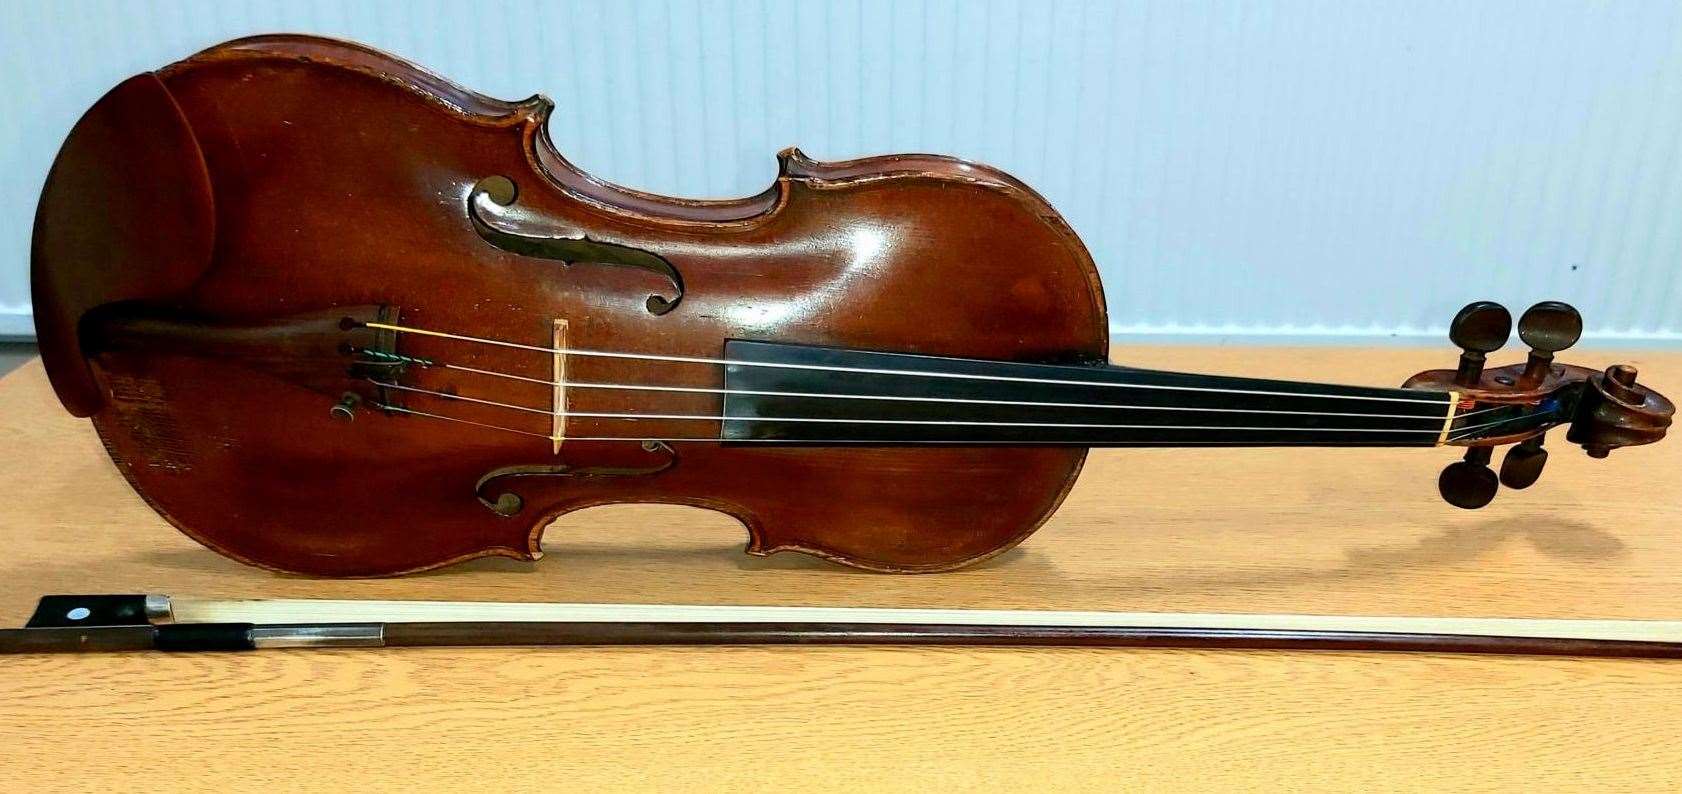 The antique violin was stolen from a BMW in South Park, Sevenoaks. Picture: Kent Police